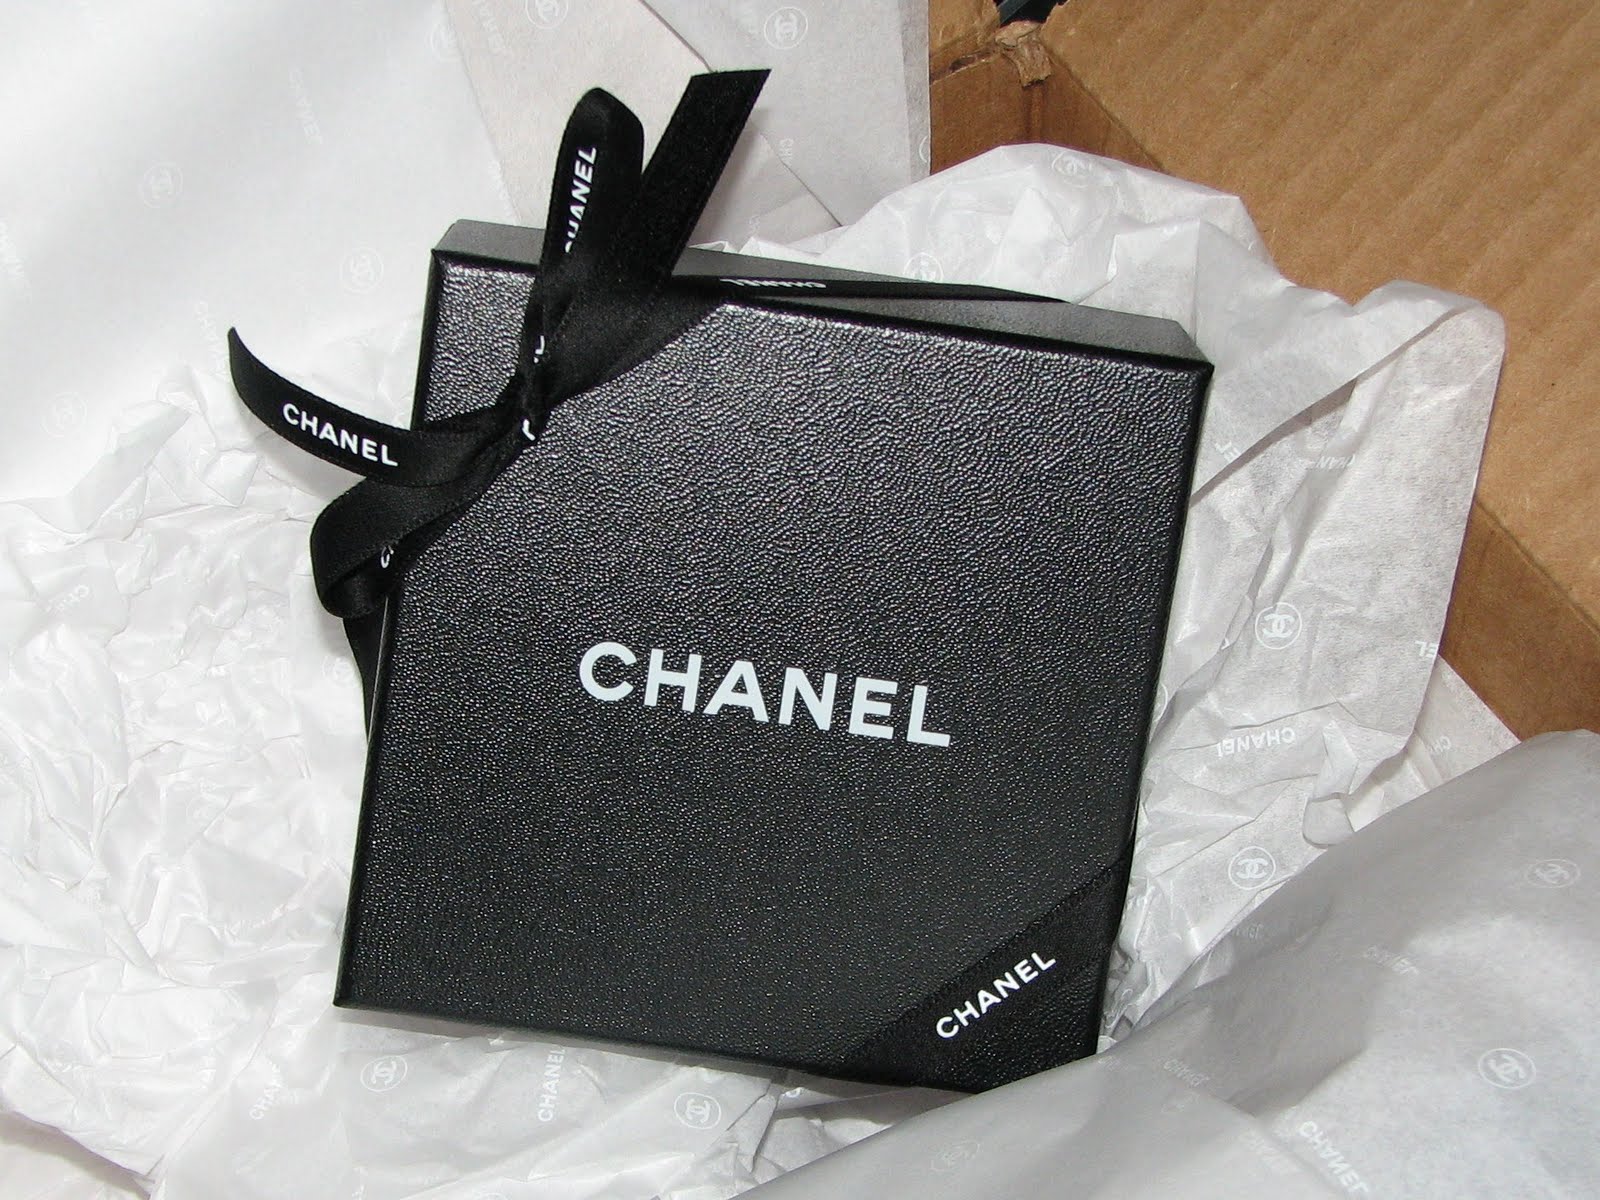 Chanel Polishes & Packaging - Blushing Noir